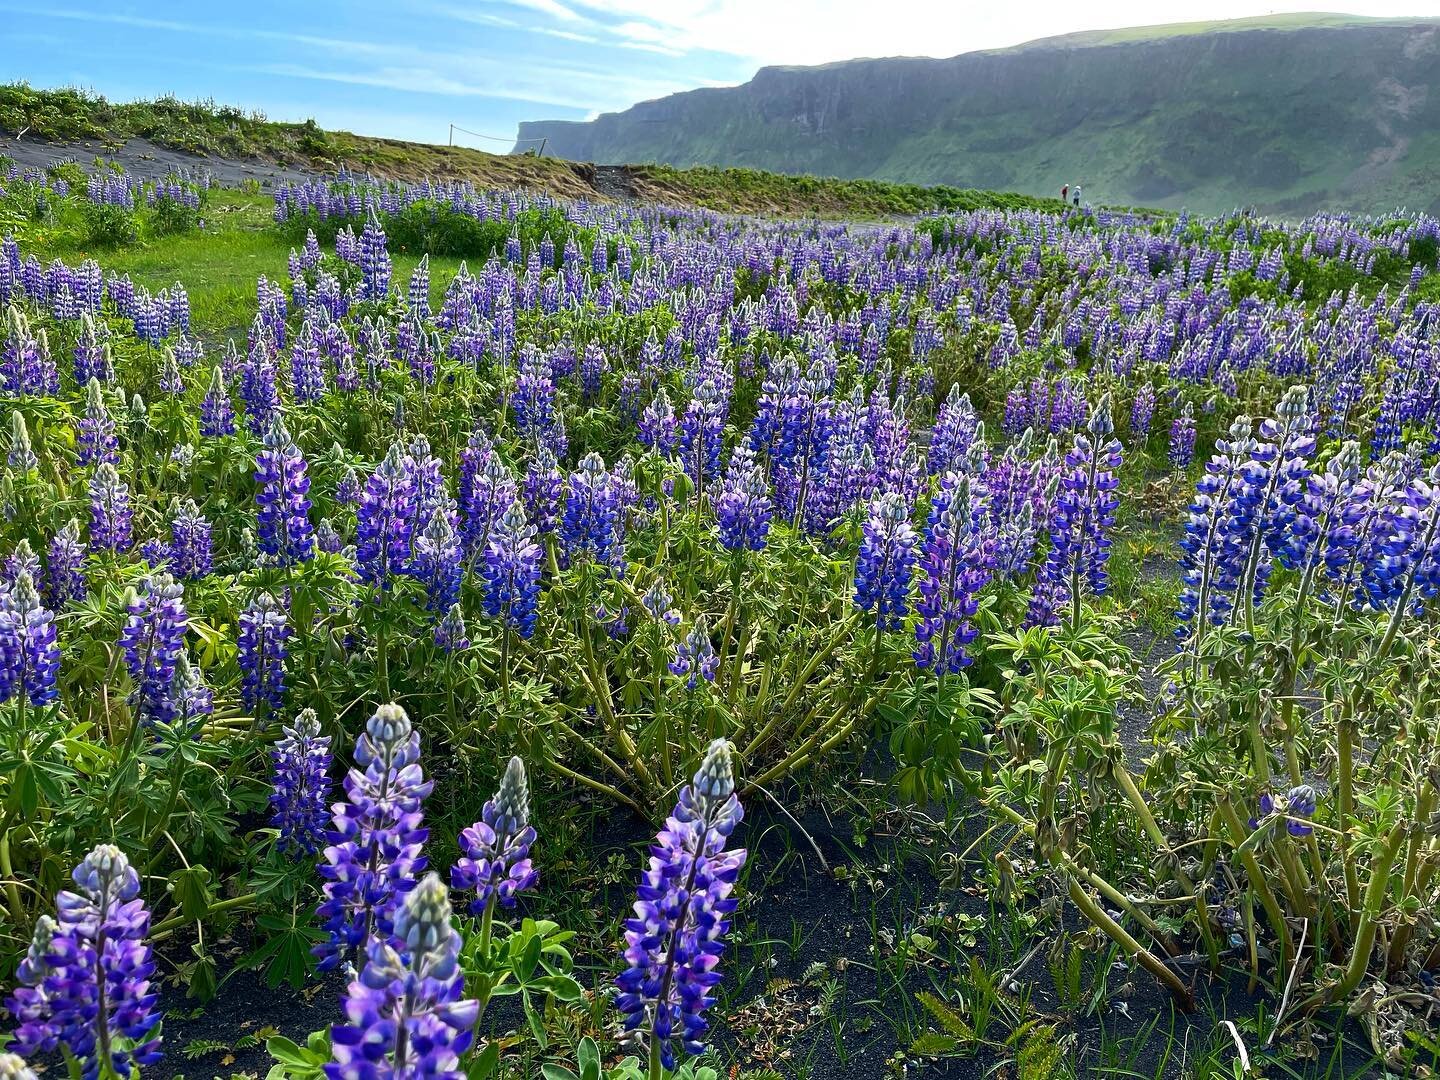 Hope your day is absolutely beautiful. ❤️ 
.
.
.
.
.
.
.
#iceland #travel #travelphotography #travelblogger #flowers #flower #meadow #photography #purple #landscape #landscapephotography